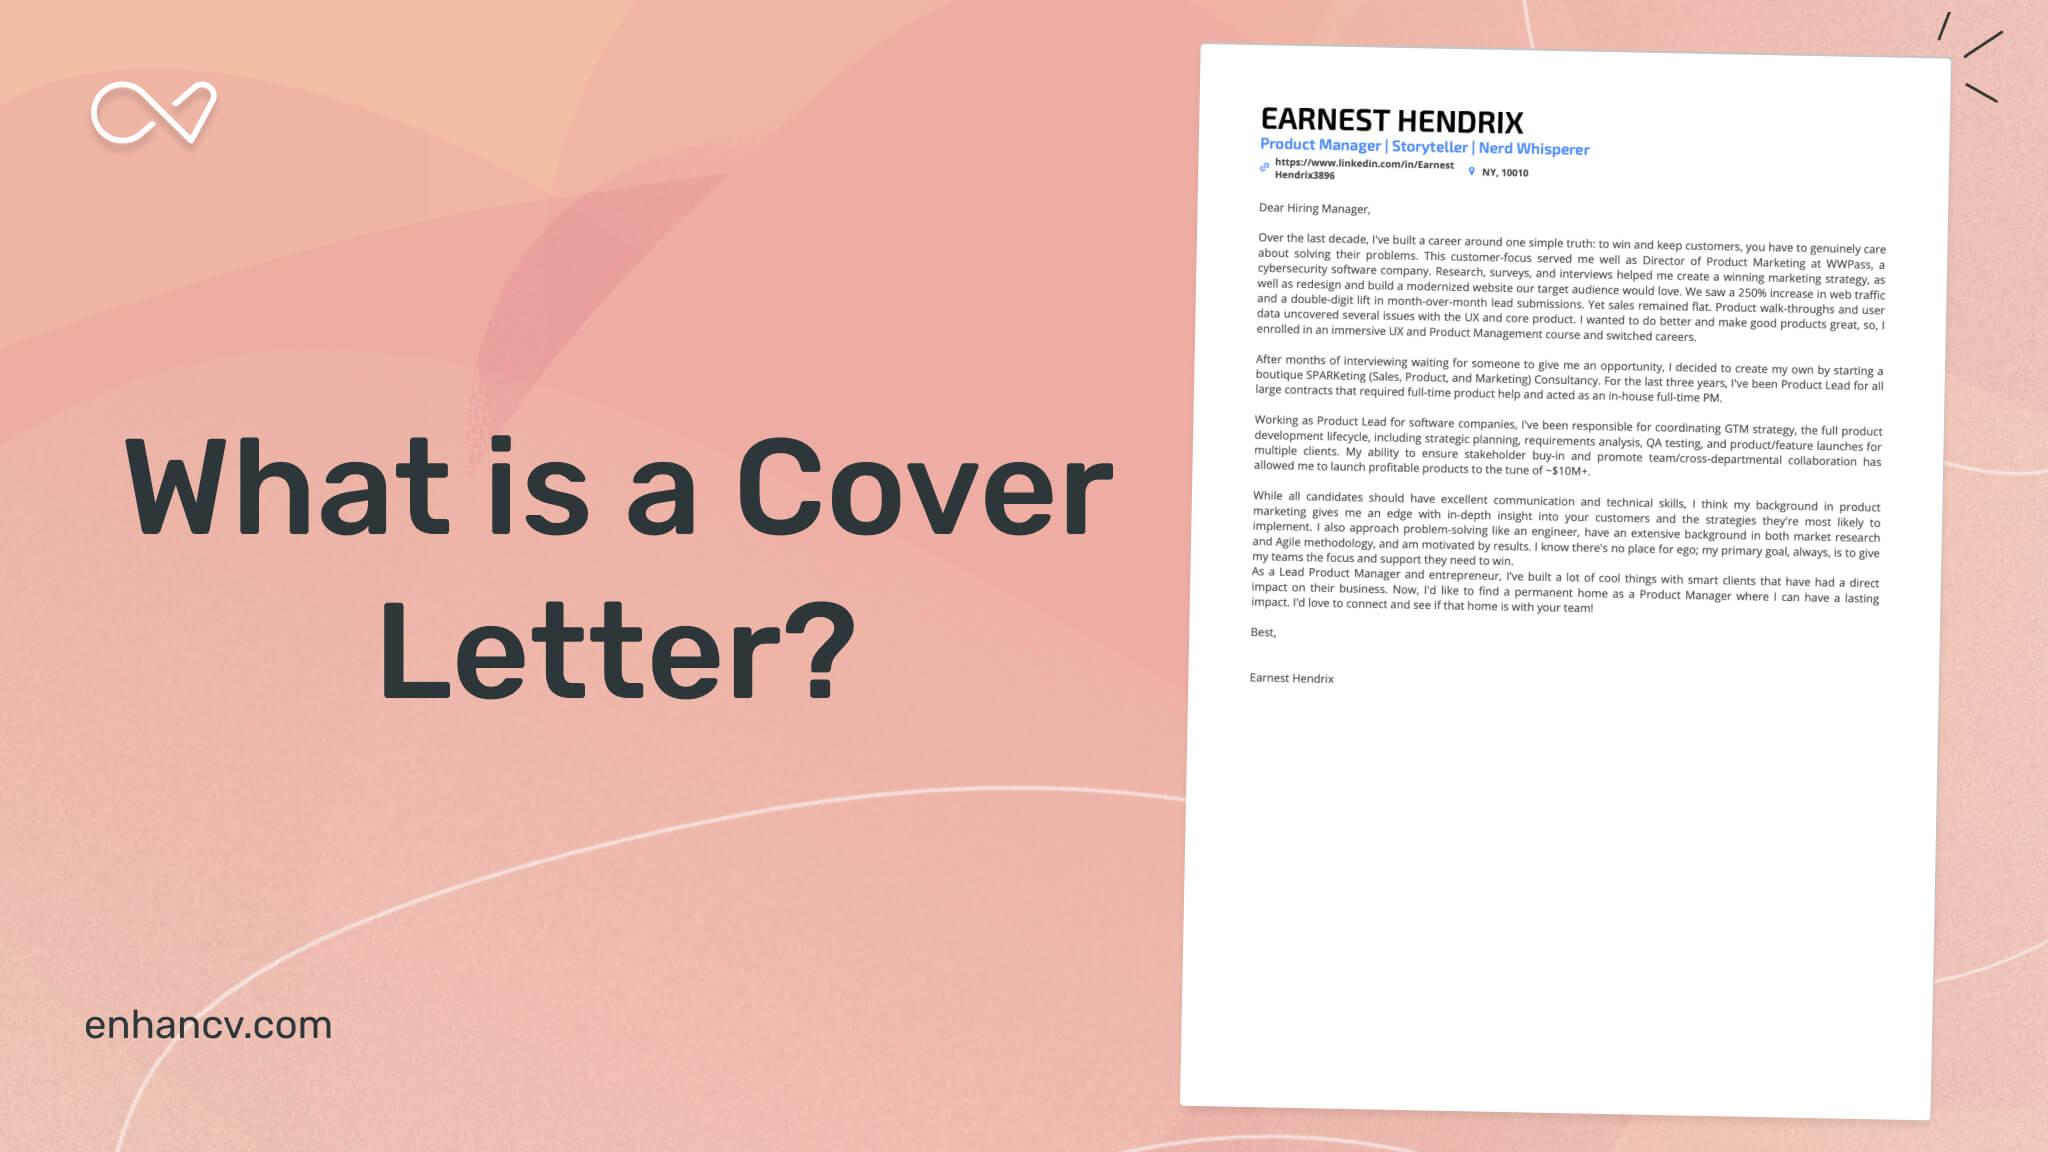 what's the meaning of a cover letter